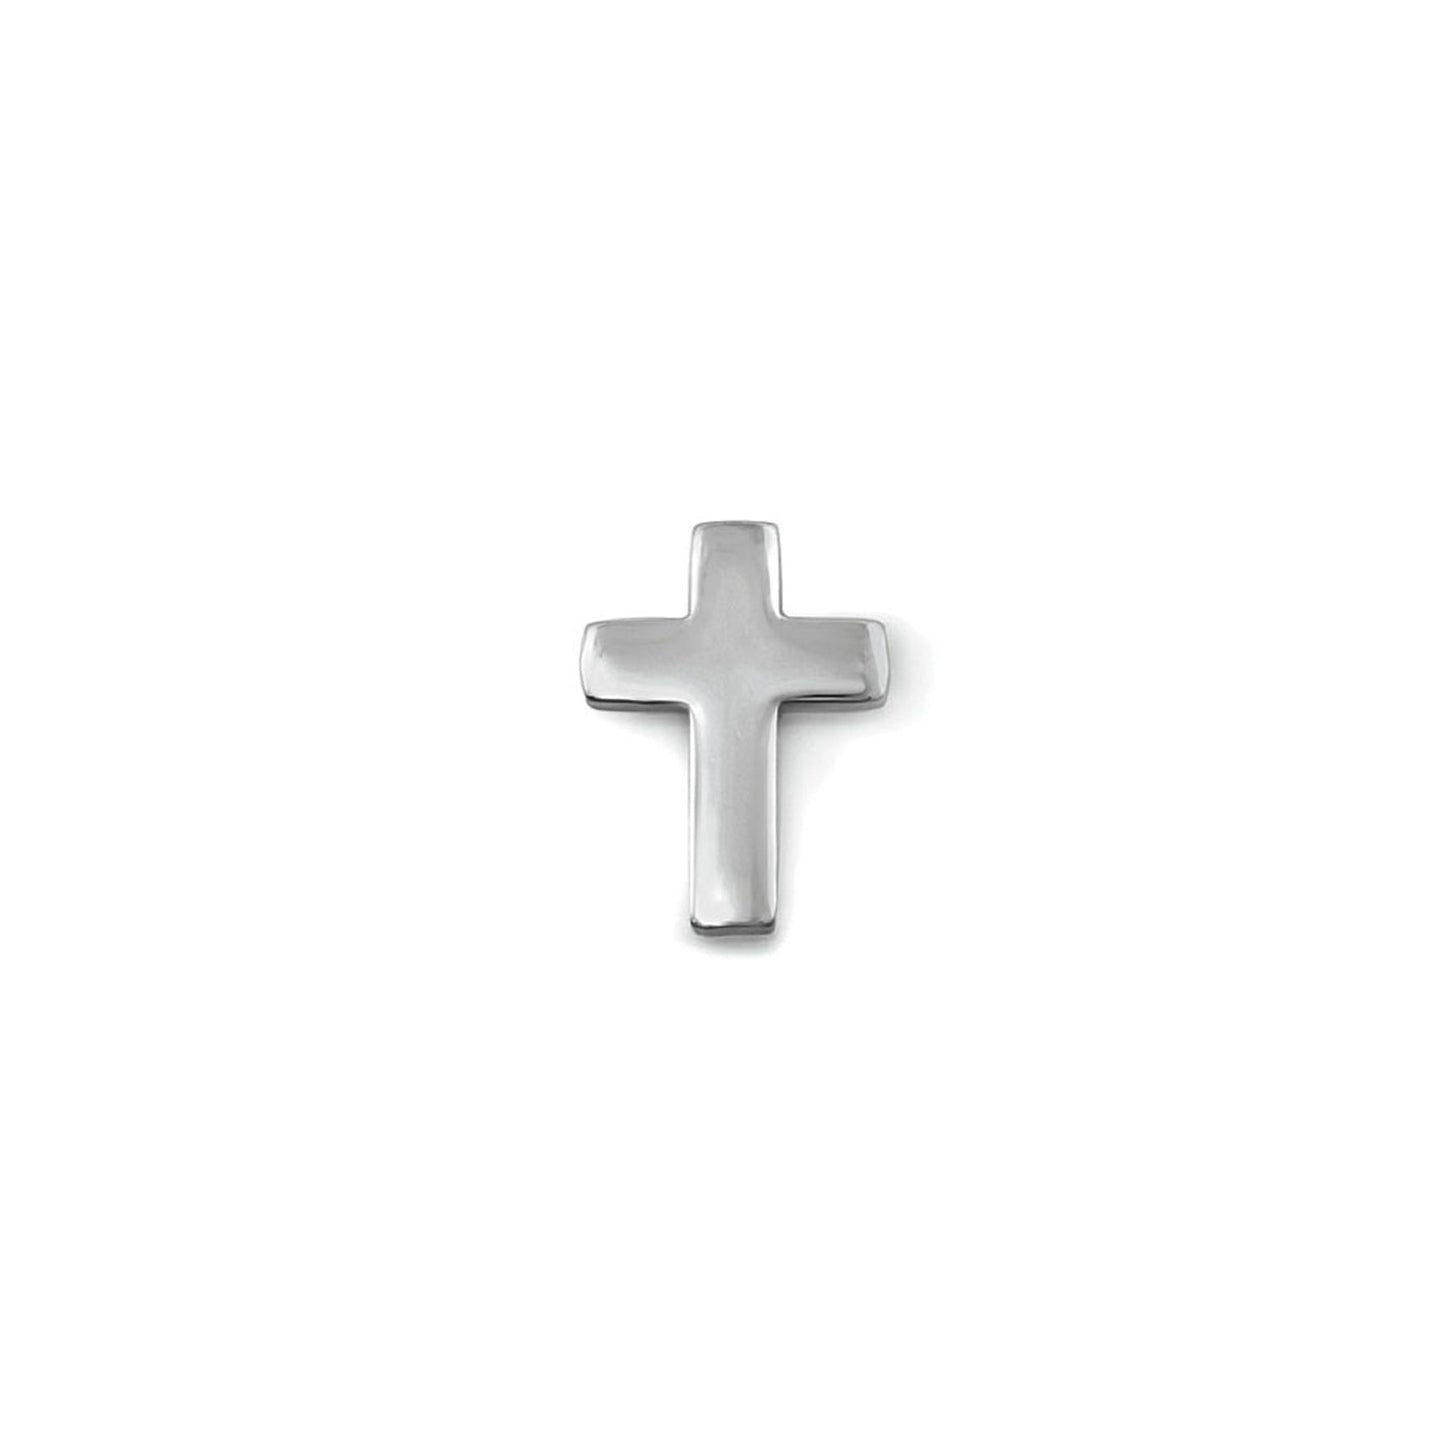 A cross tie tack displayed on a neutral white background.